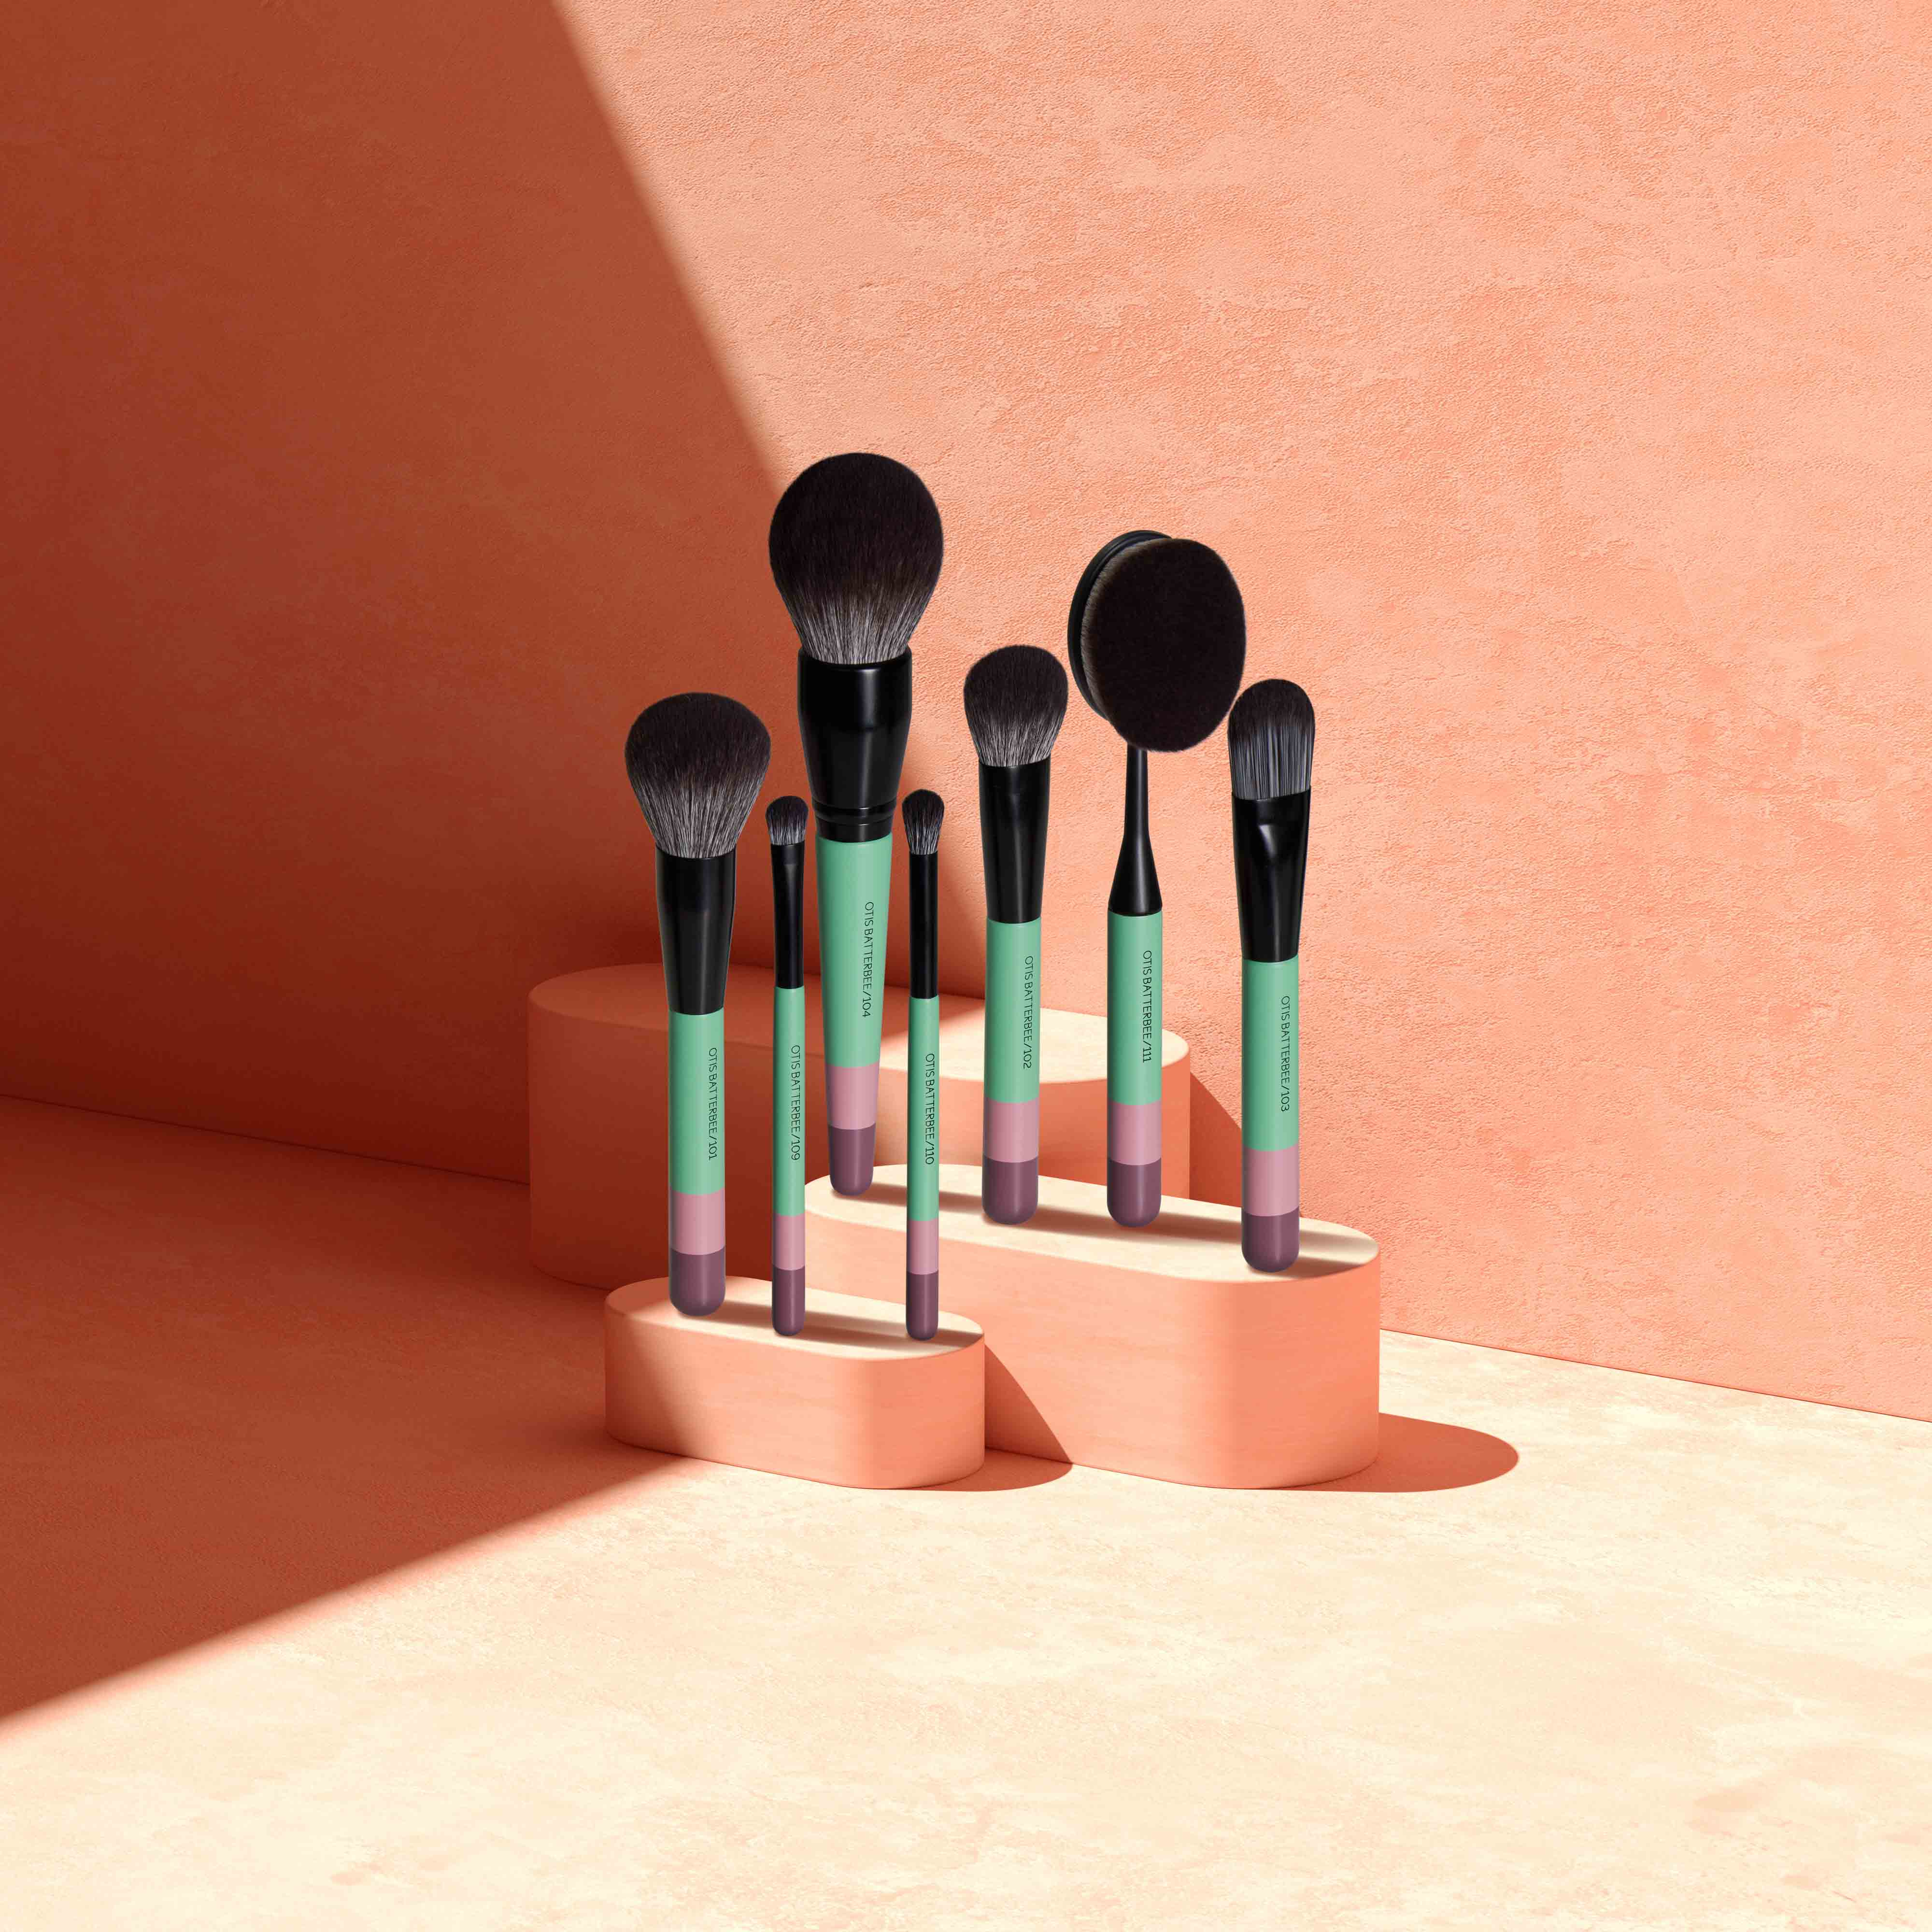 Otis Batterbee complete 7 piece makeup brush set – Add contour and flawless definition to cheeks and even apply powders and mineral foundations for smooth, high-definition results.